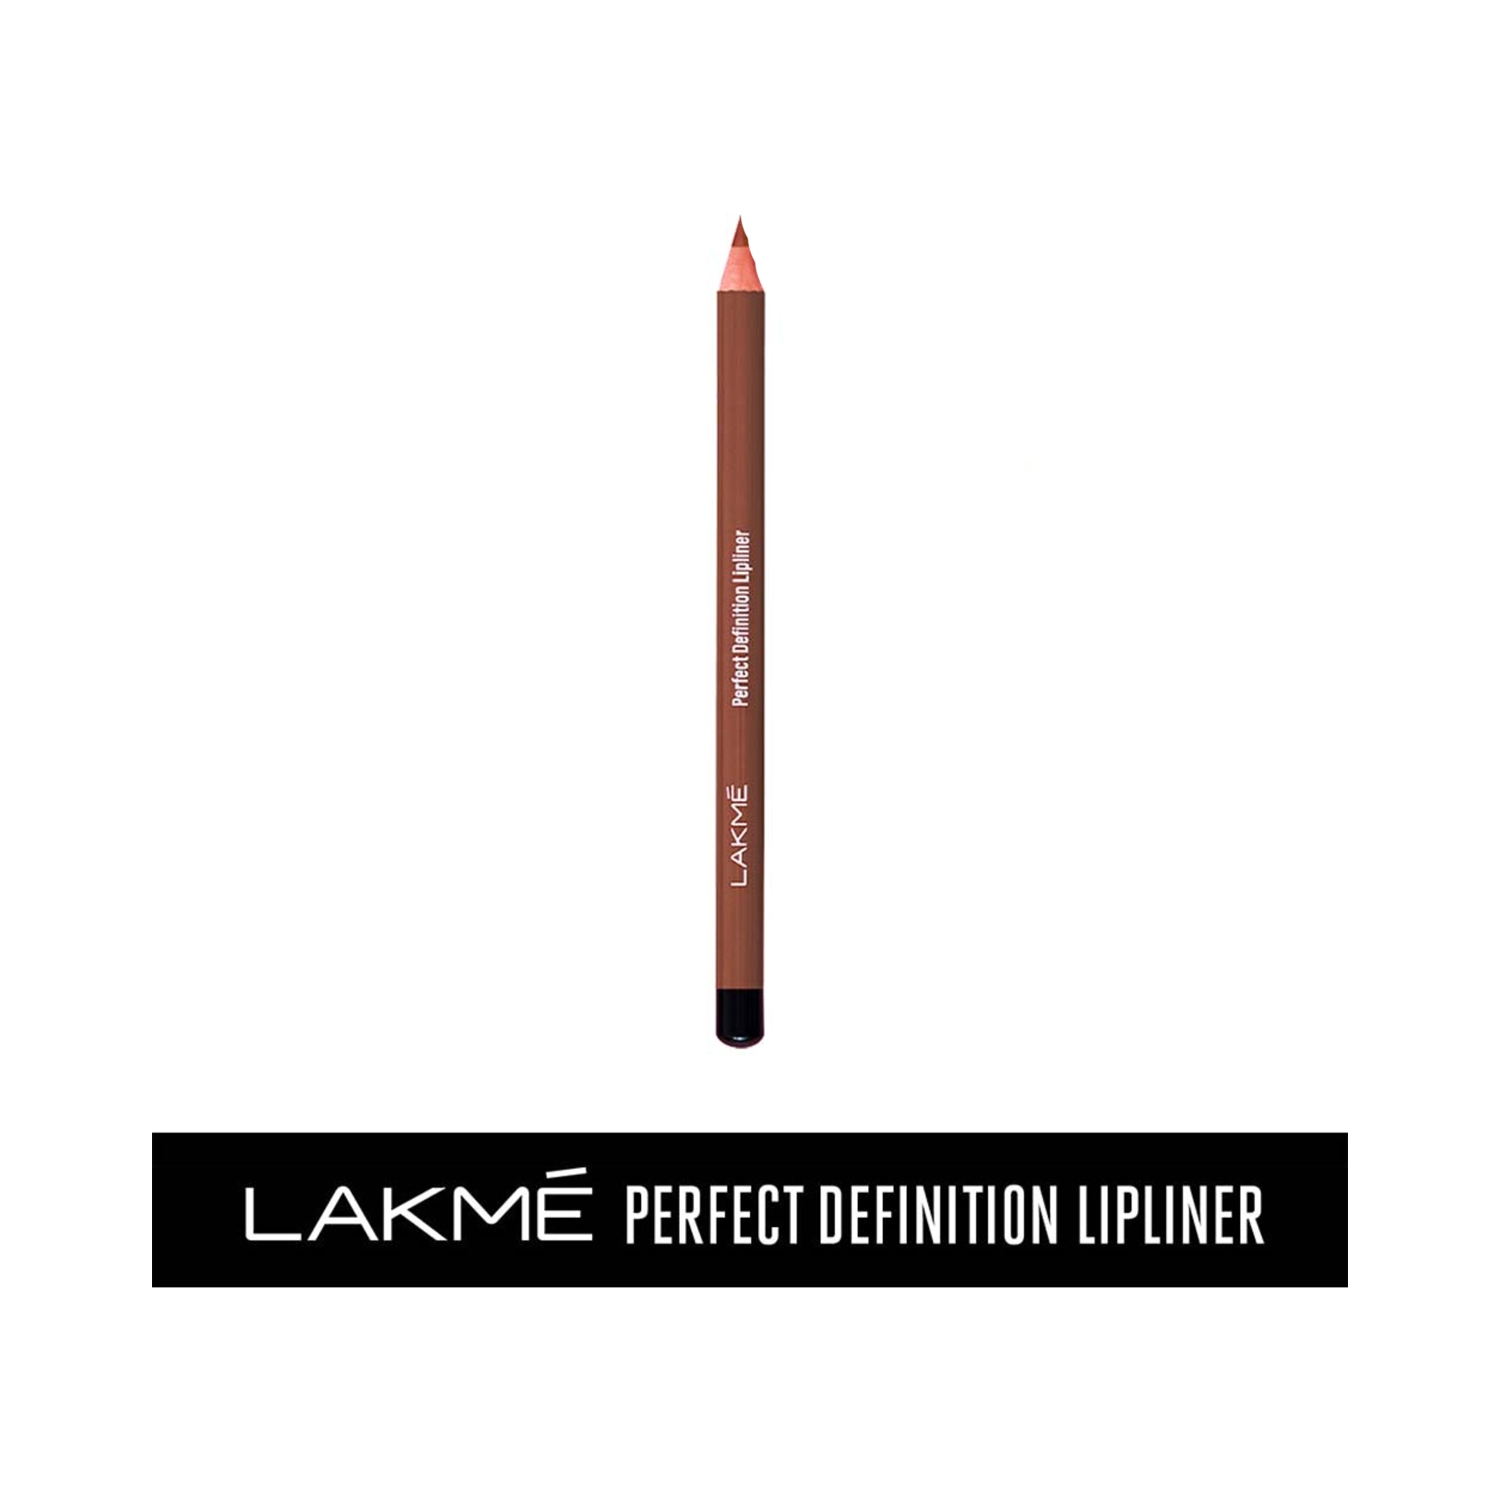 Lakme | Lakme Perfect Definition Lip Liner - Spice Note (0.78g)